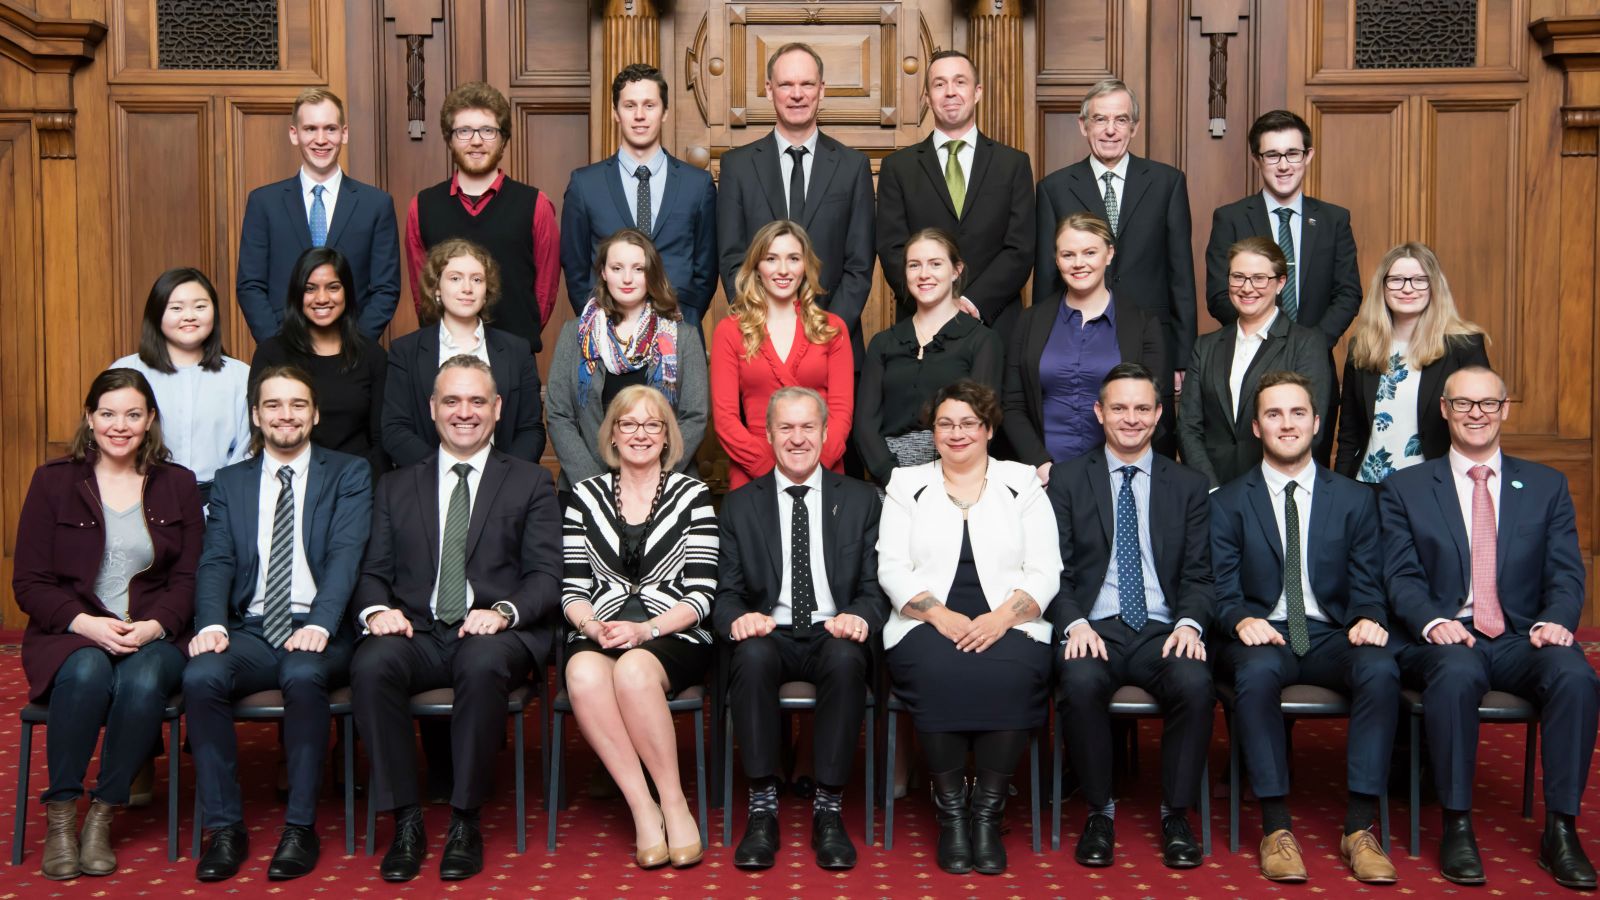 Parliamentary Internship Programme class photo, 2017, showing interns with their MPs, parliamentary staff, course coordinator Professor Stephen Levine, and with the Speaker, Rt Hon David Carter: photograph taken in the Legislative Council Chamber, Parliament (by VUW Image Services).